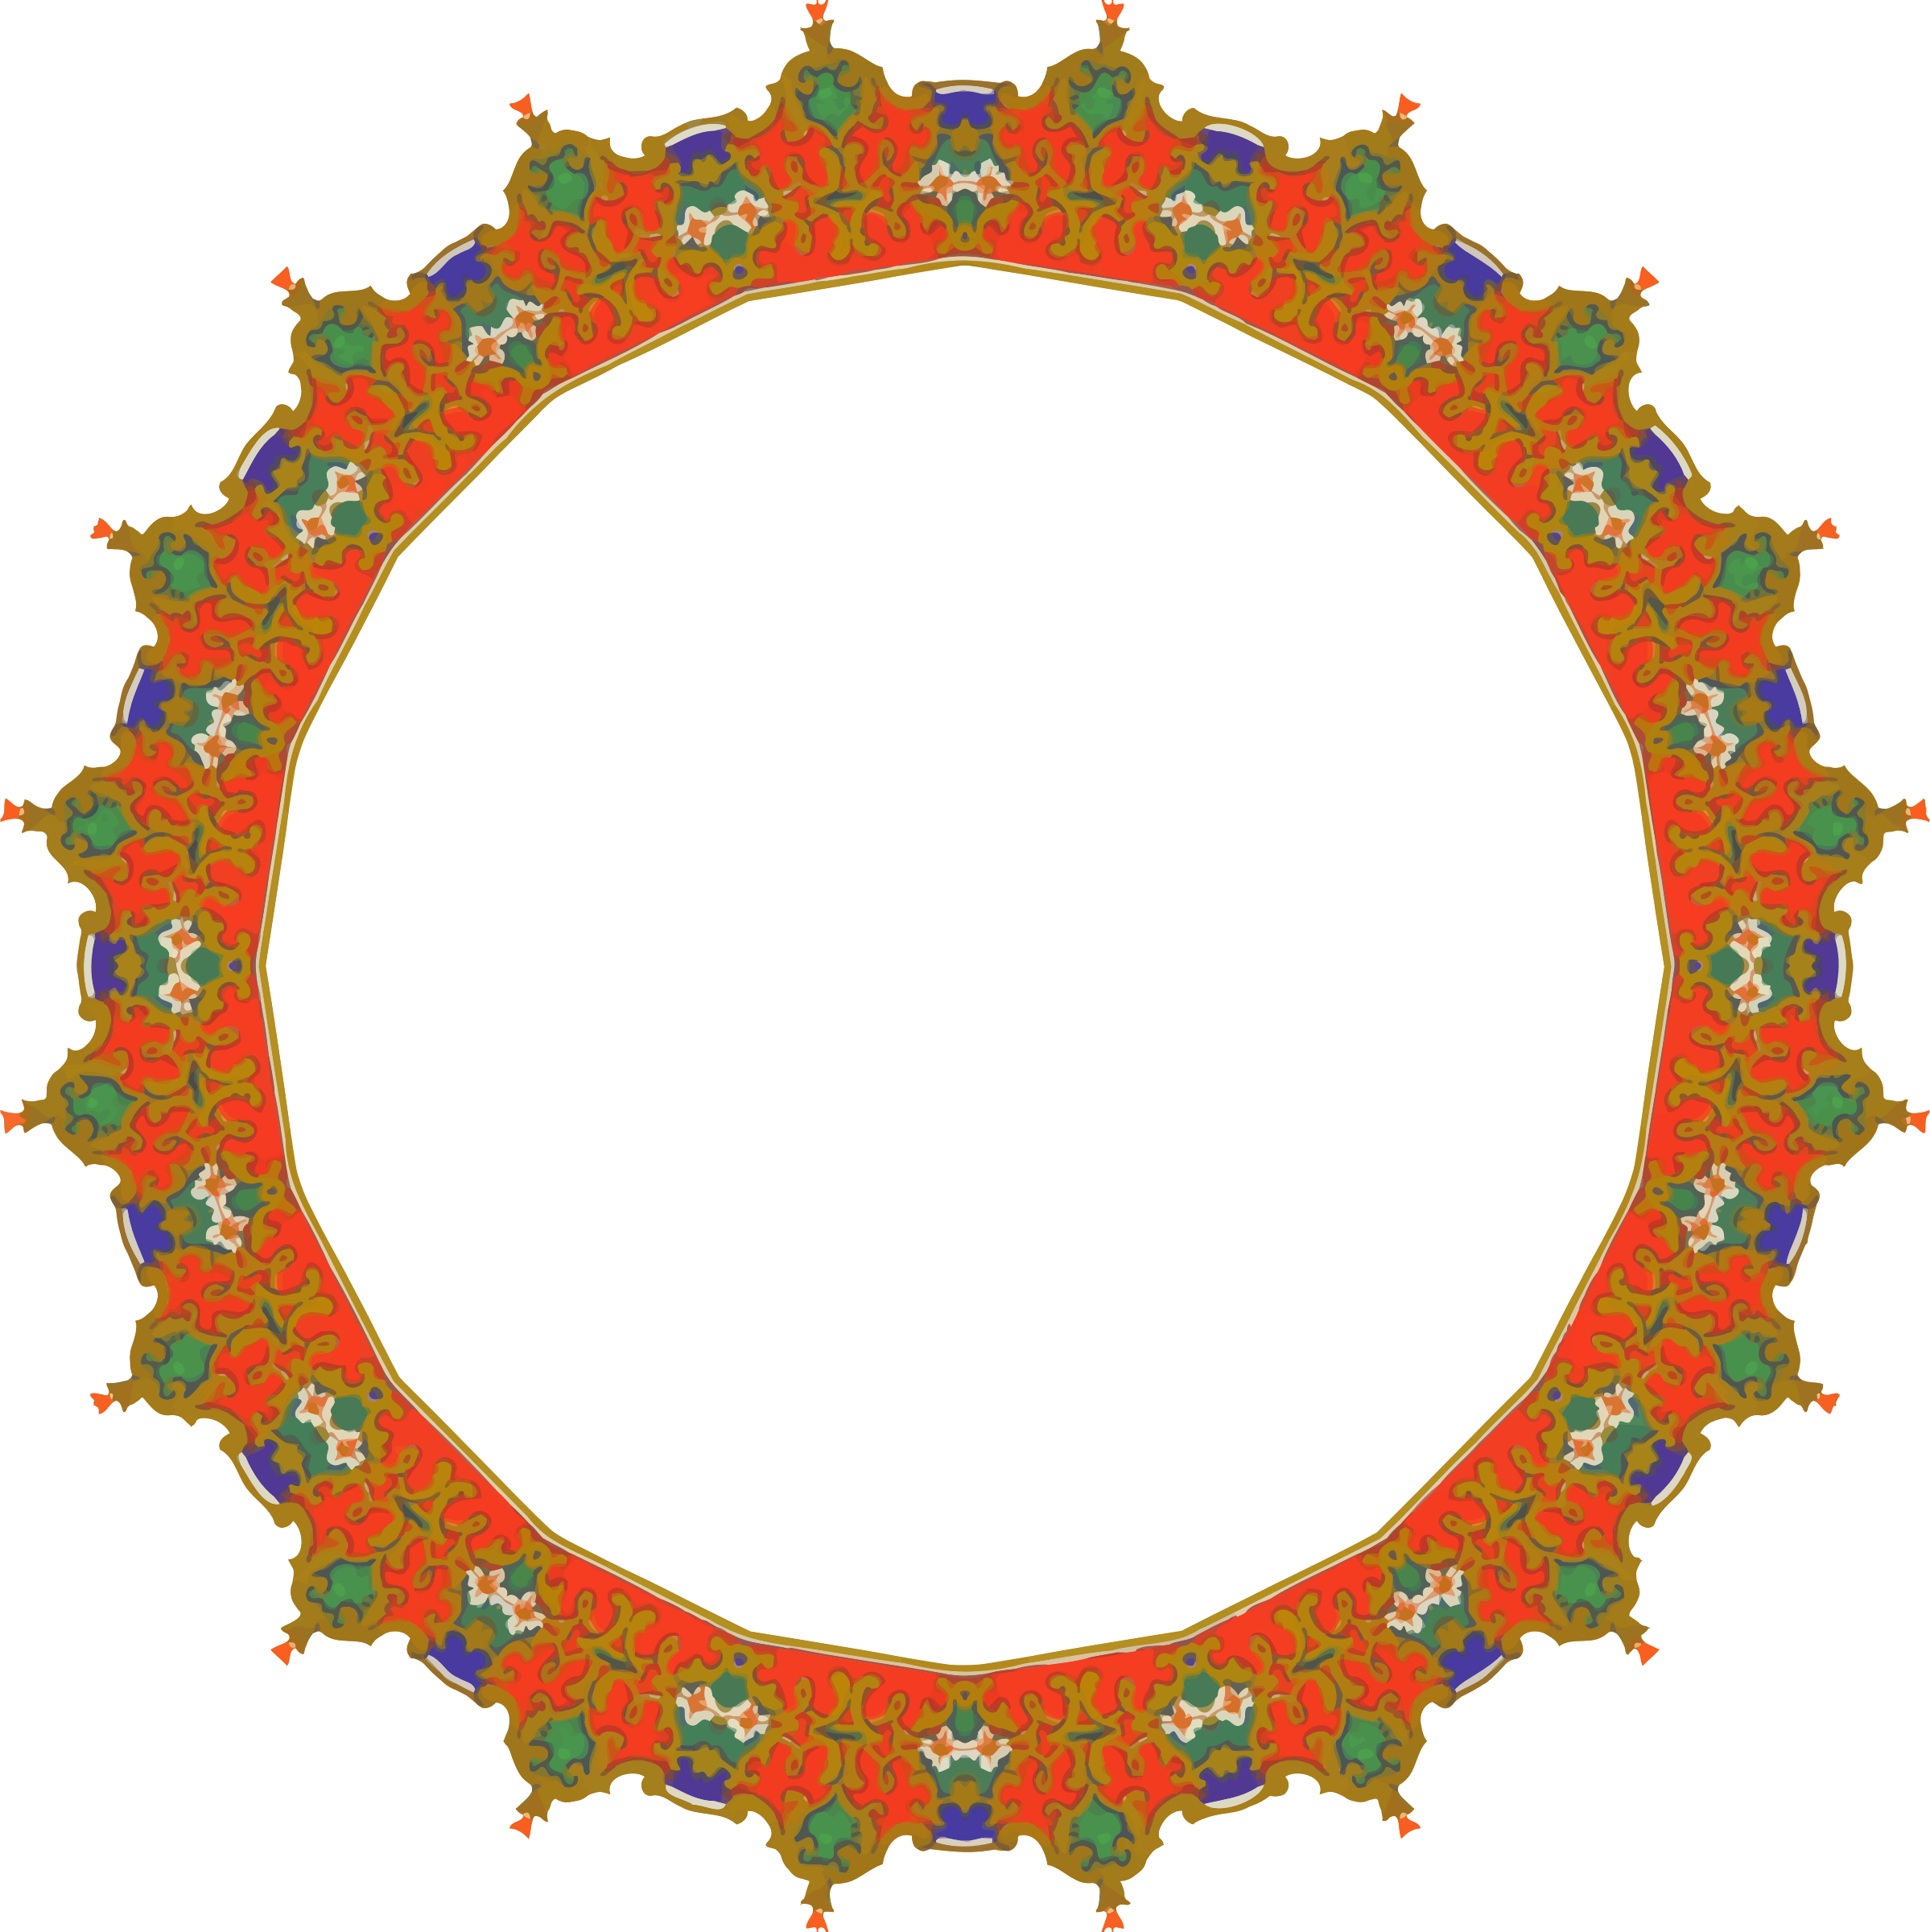 This Free Icons Png Design Of Circular Ornate Frame - This Free Icons Png Design Of Circular Ornate Frame (2398x2400)